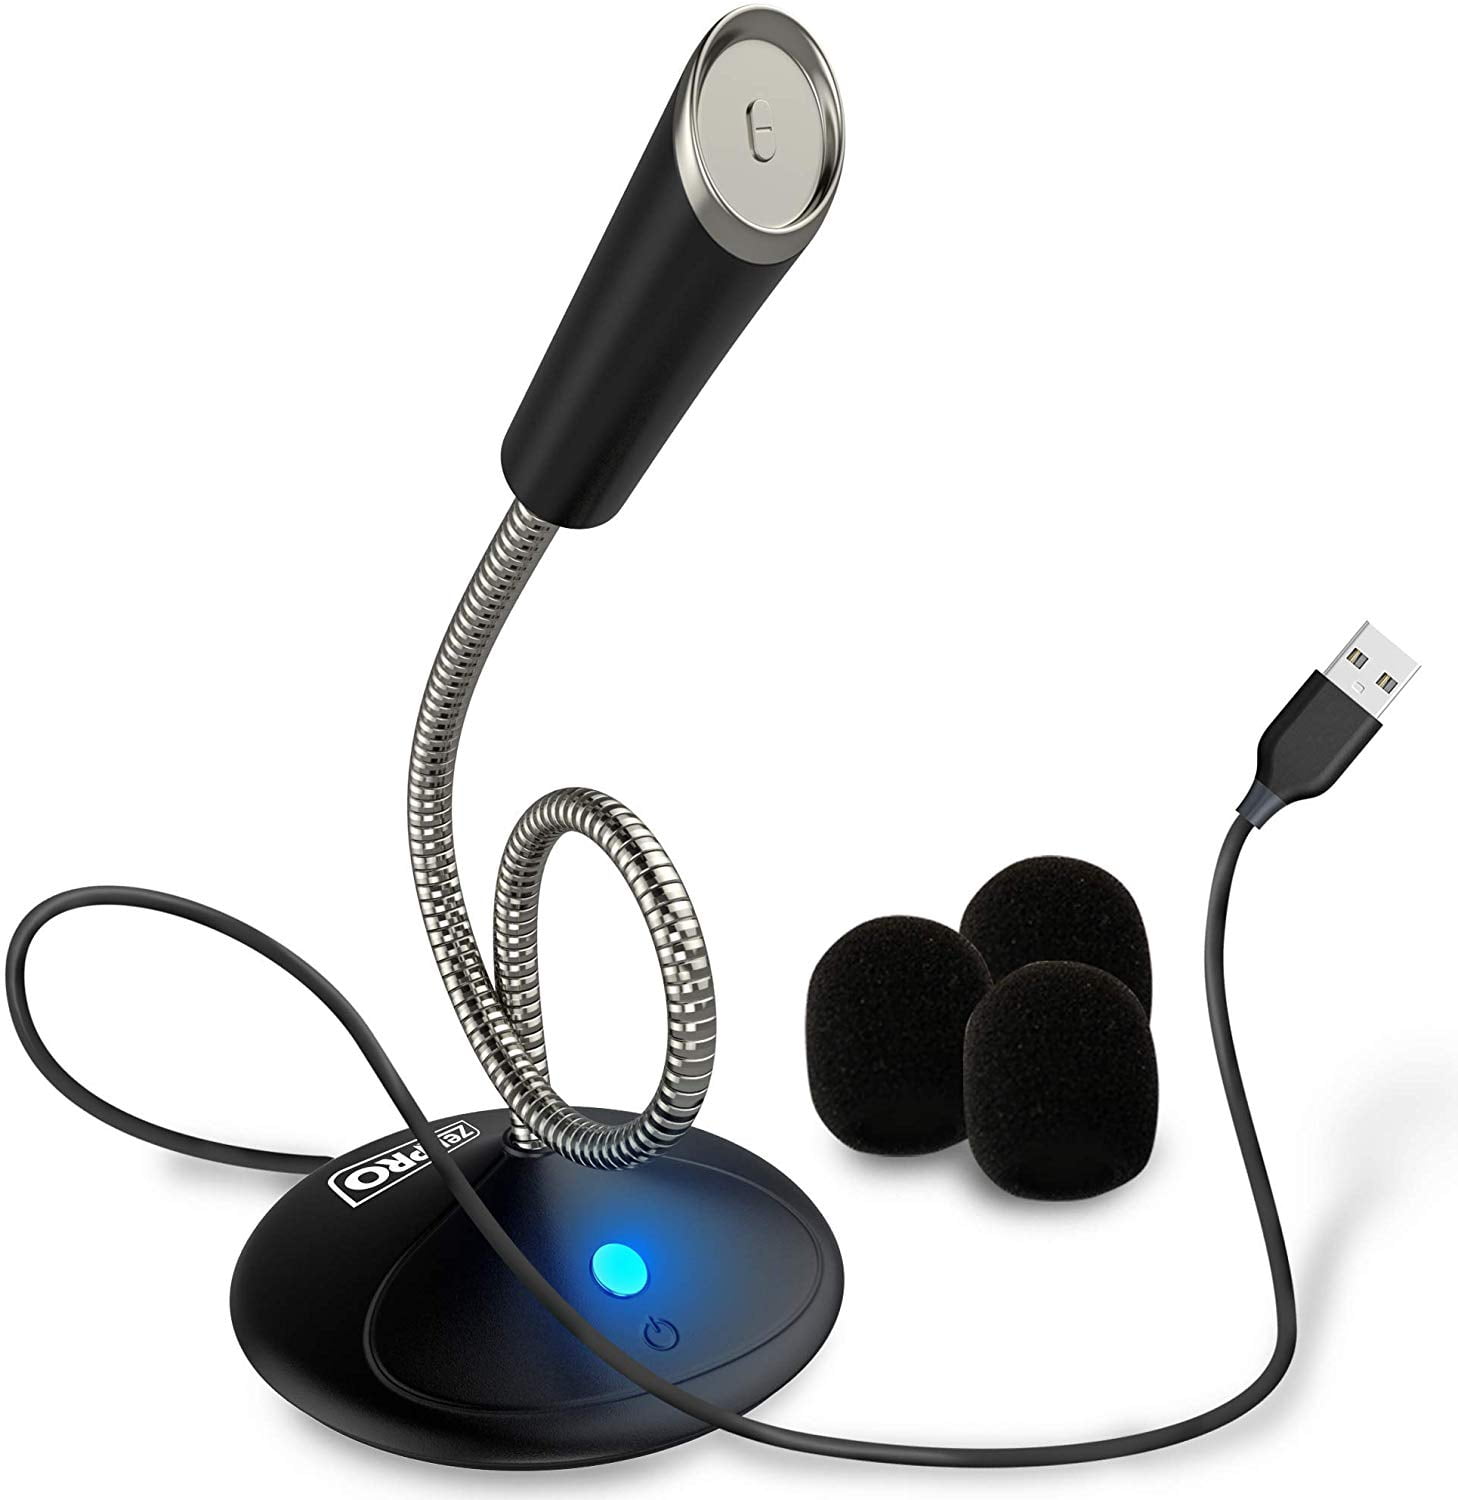 Skype Game Small Computer Microphone Podcast Plug-and-Play Desktop Omnidirectional Condenser PC Laptop Microphone Very Suitable for YouTube USB Computer Microphone Compatible with Windows/Mac 